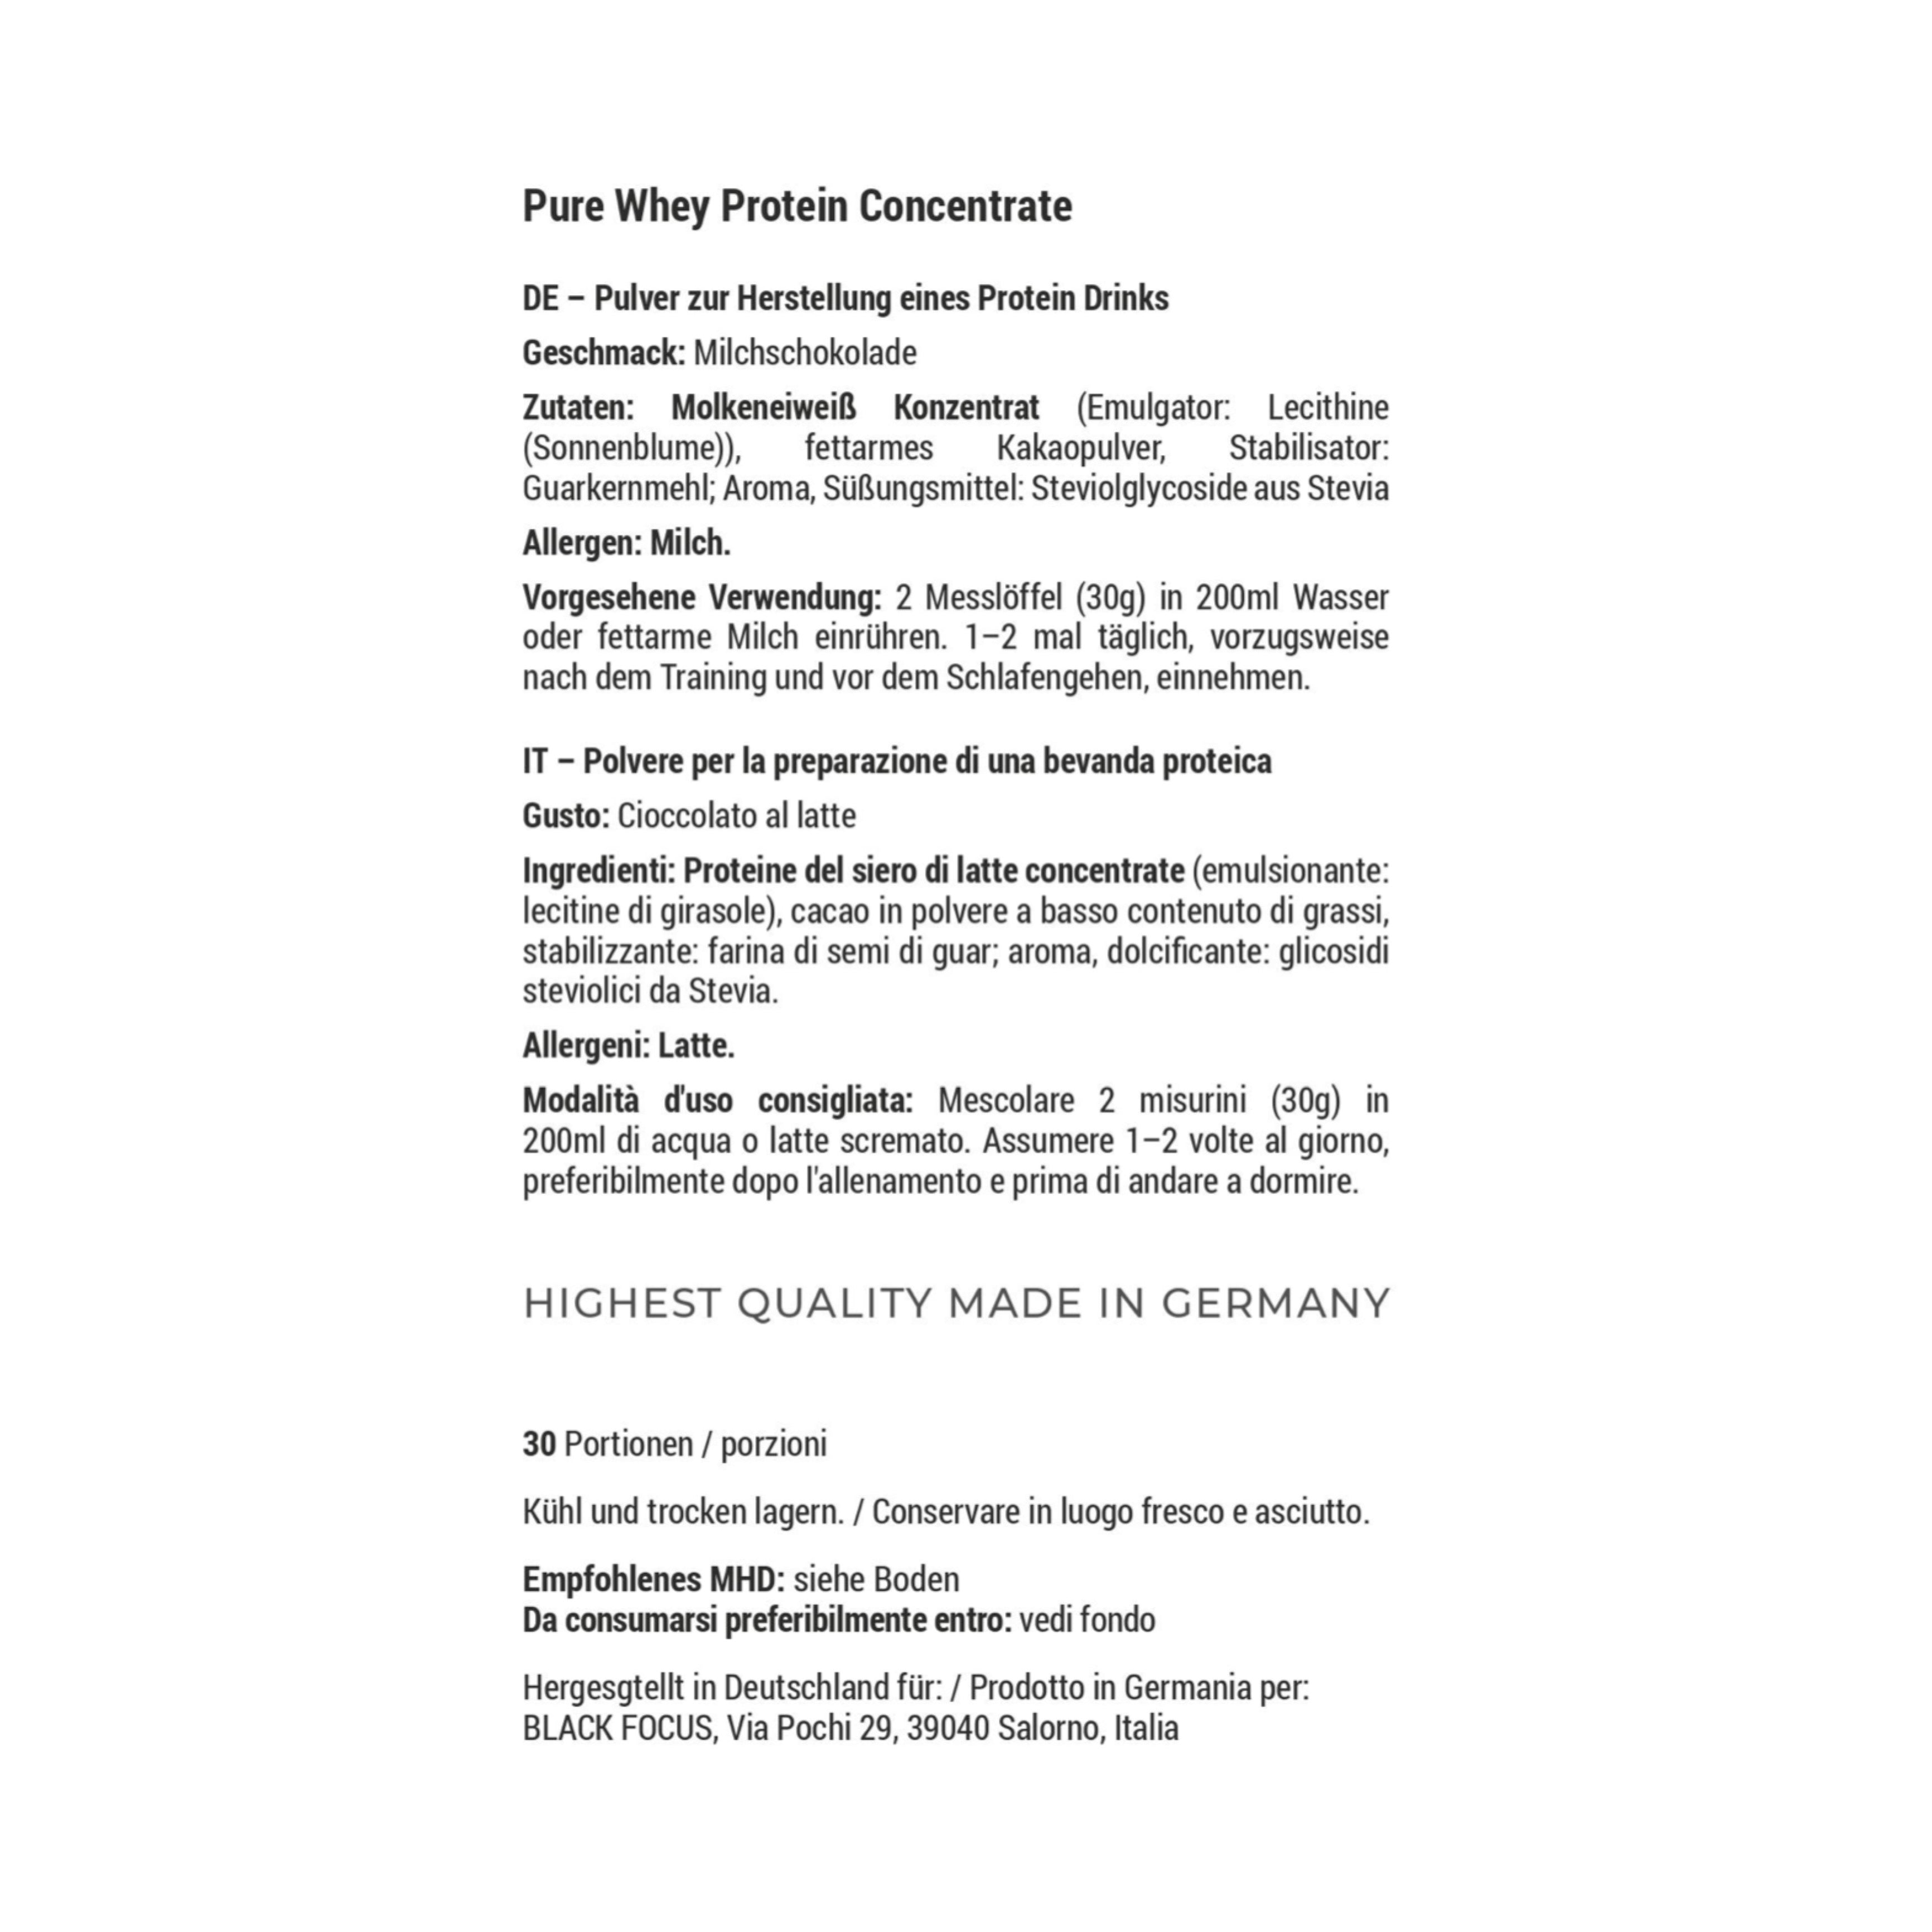 Whey Protein - Pure Whey Protein Concentrate